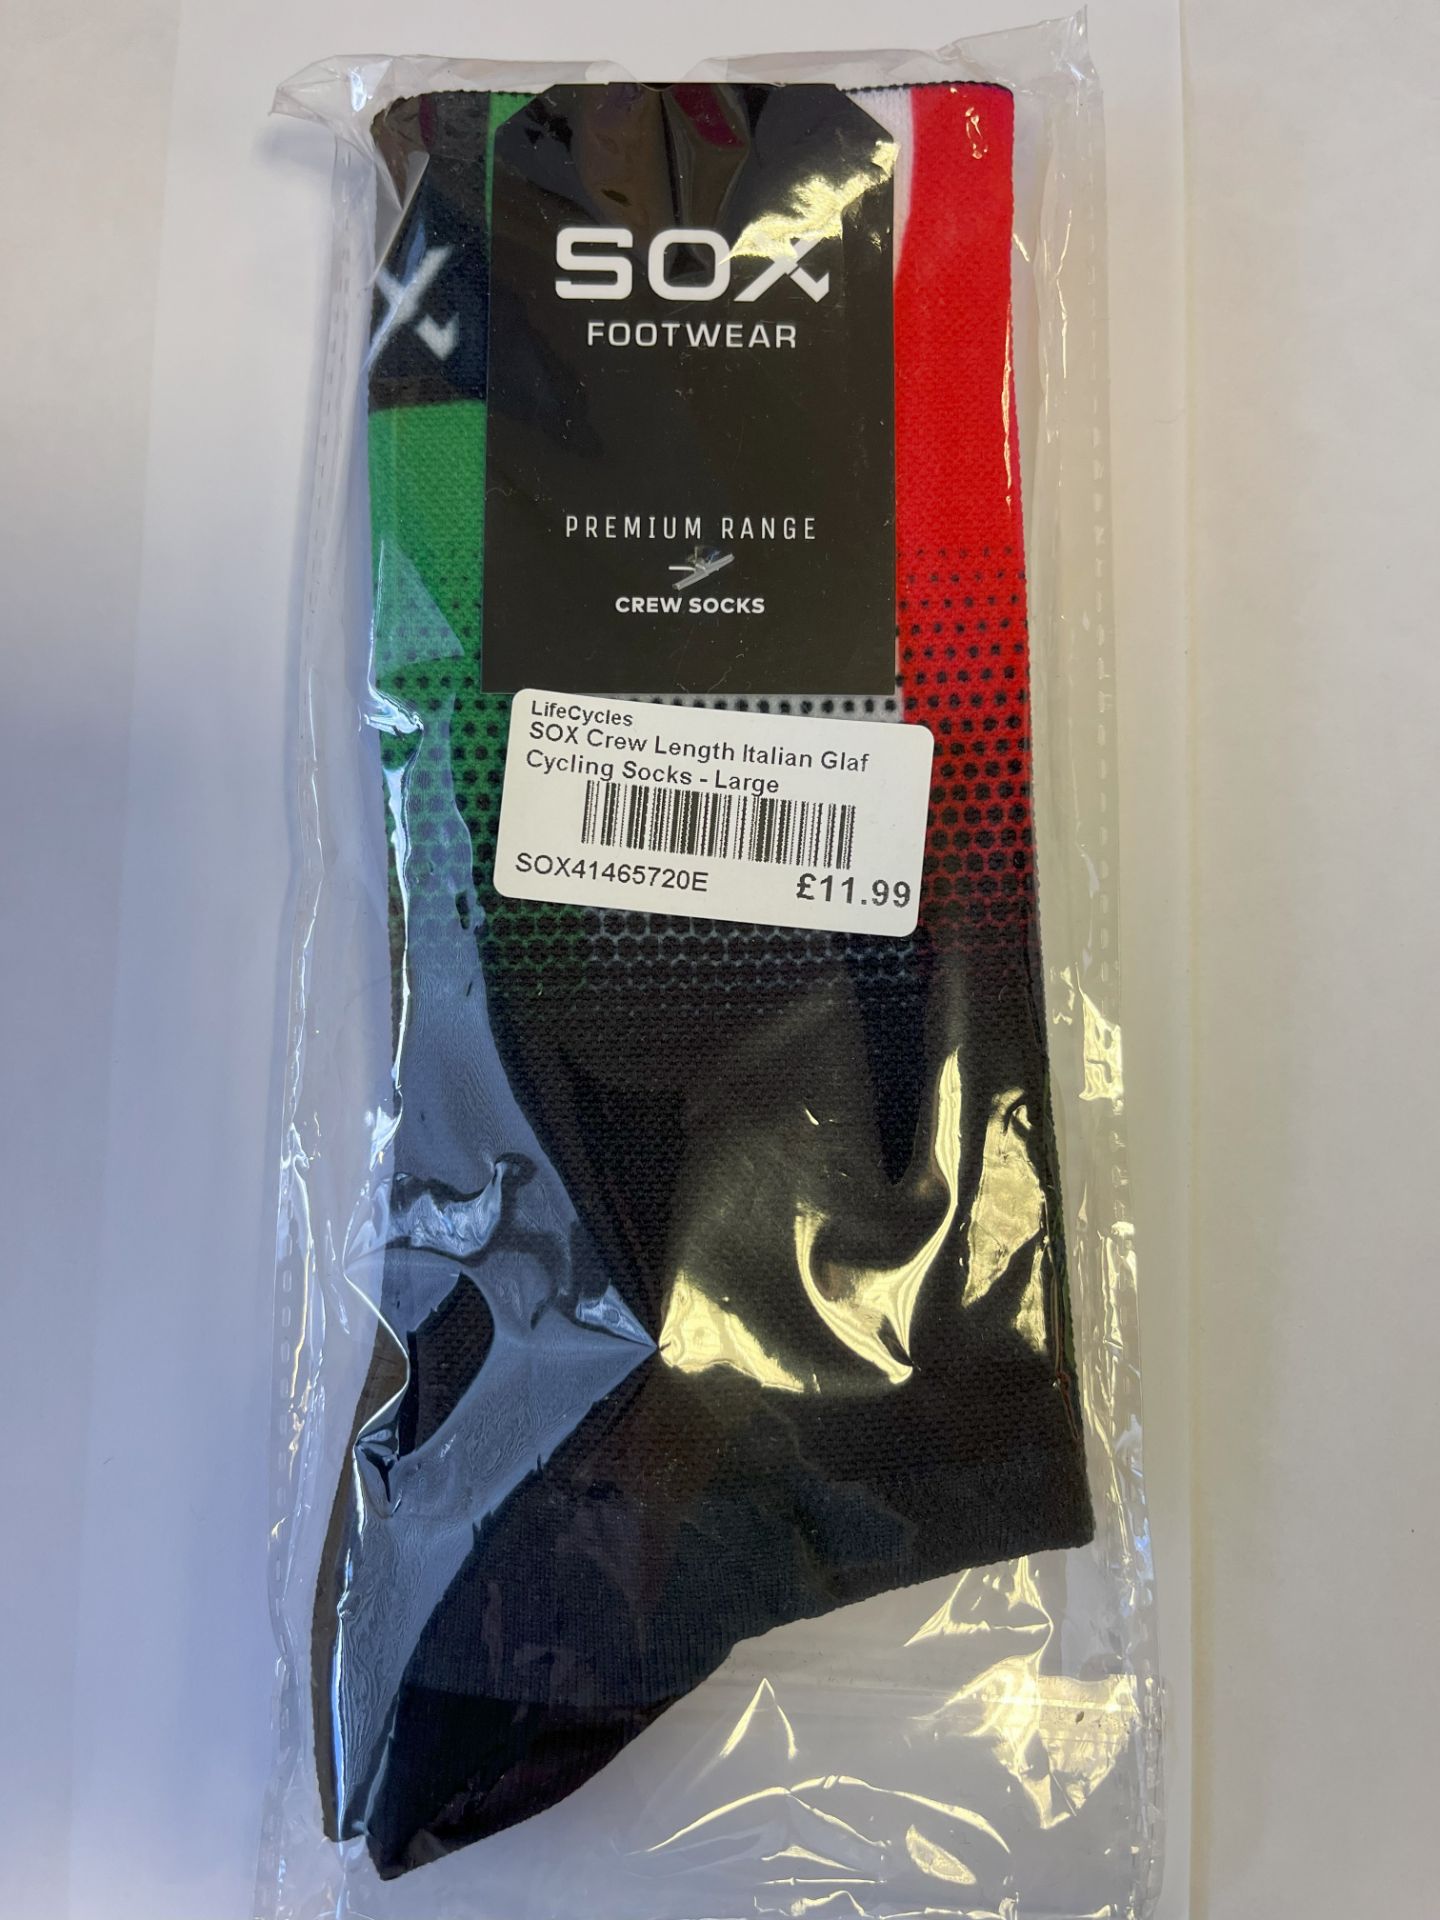 Socks to include 17x Sox Footware Crew Length Italian Glaf Cycling Socks- Large, RRP £11.99 each; 1x - Image 2 of 7